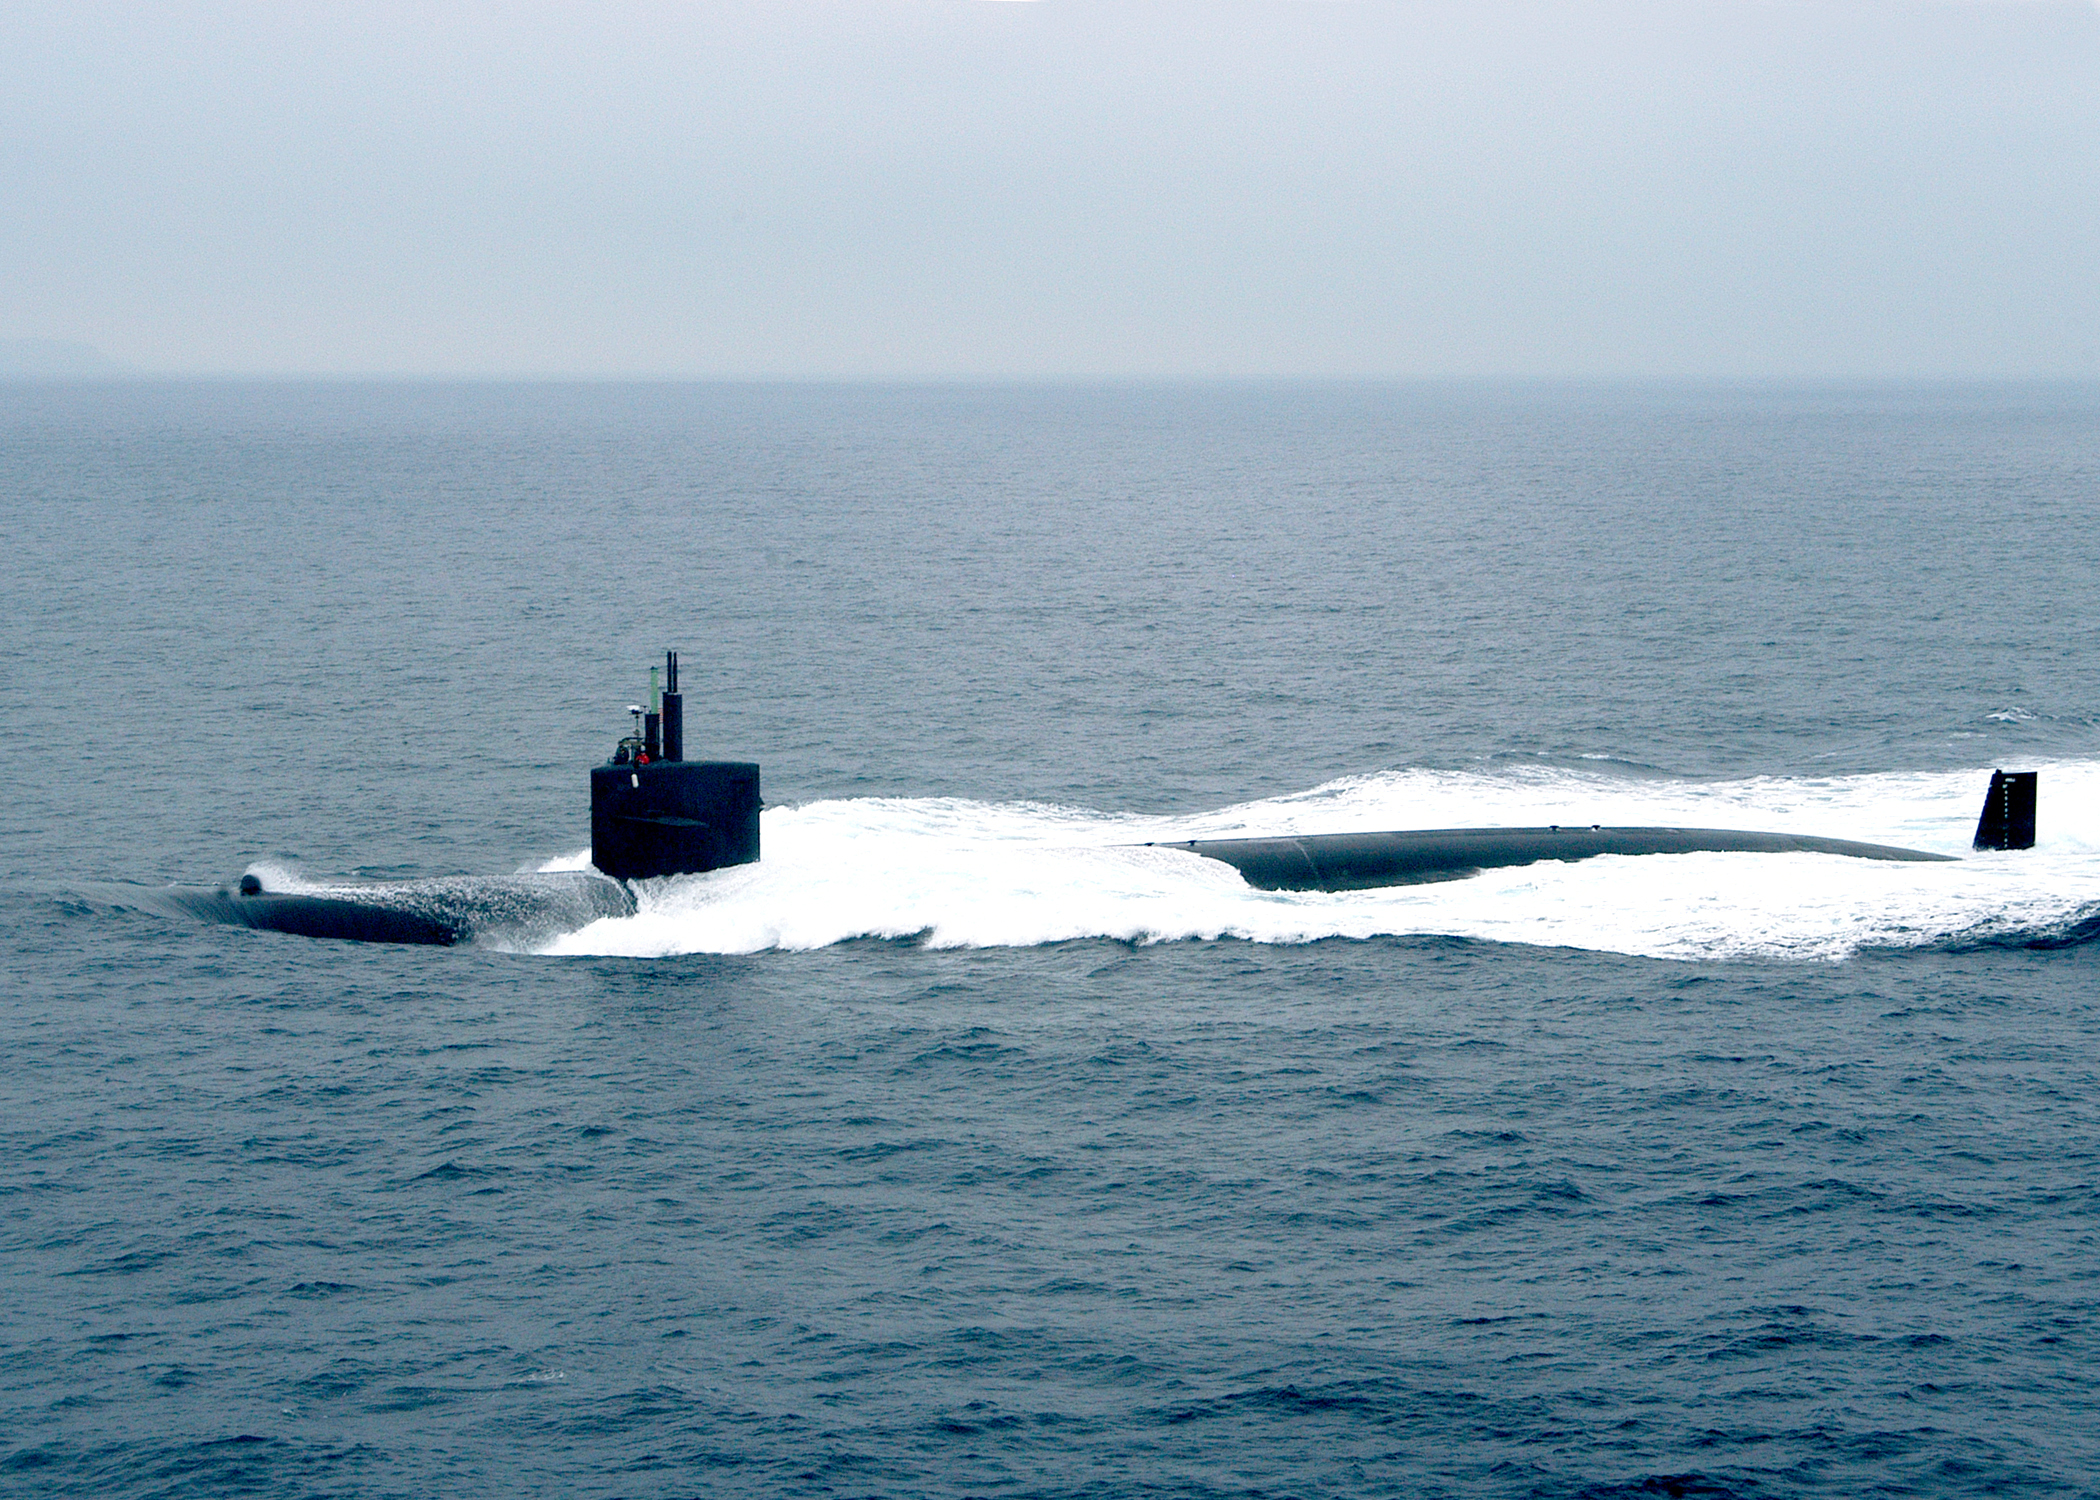 US Navy 040621-N-7615S-182 Los Angeles-class fast attack submarine USS Louisville (SSN 724) gets underway from Naval Submarine Base Point Loma, Calif., to conduct routine exercises